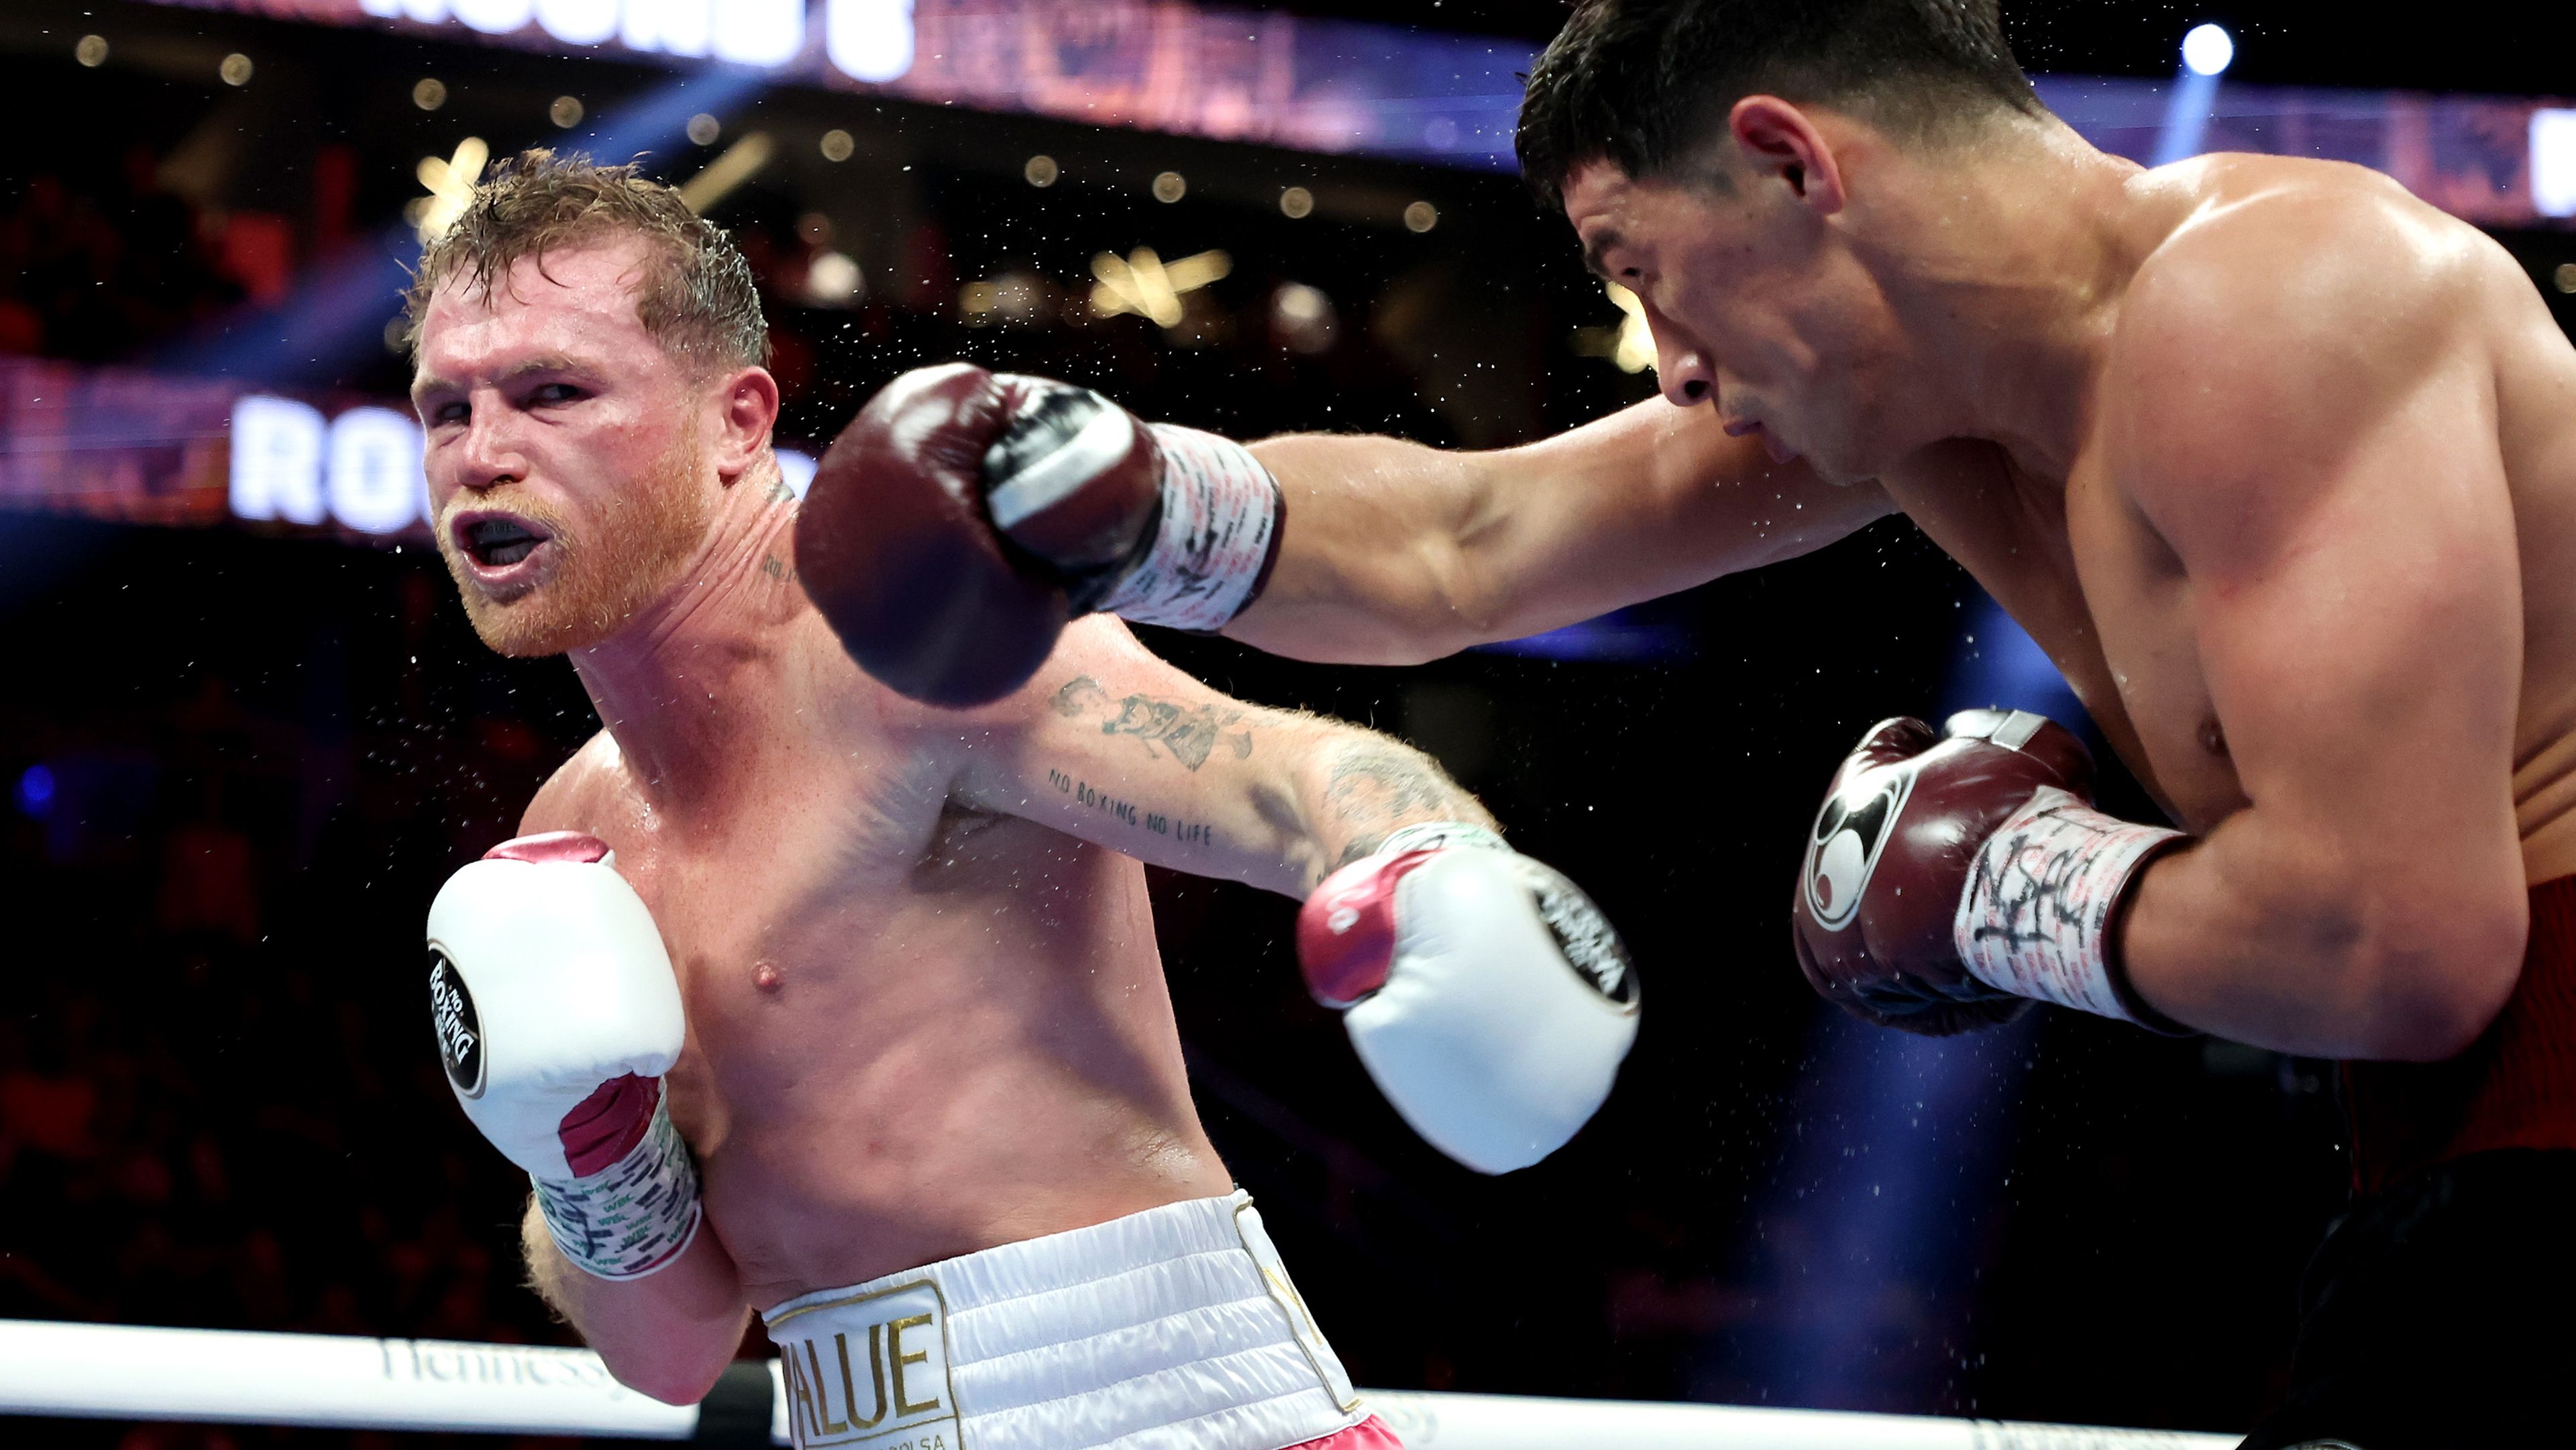 Canelo Alvarez (L) exchanges punches with Dmitry Bivol during their WBA light heavyweight title fight at T-Mobile Arena.